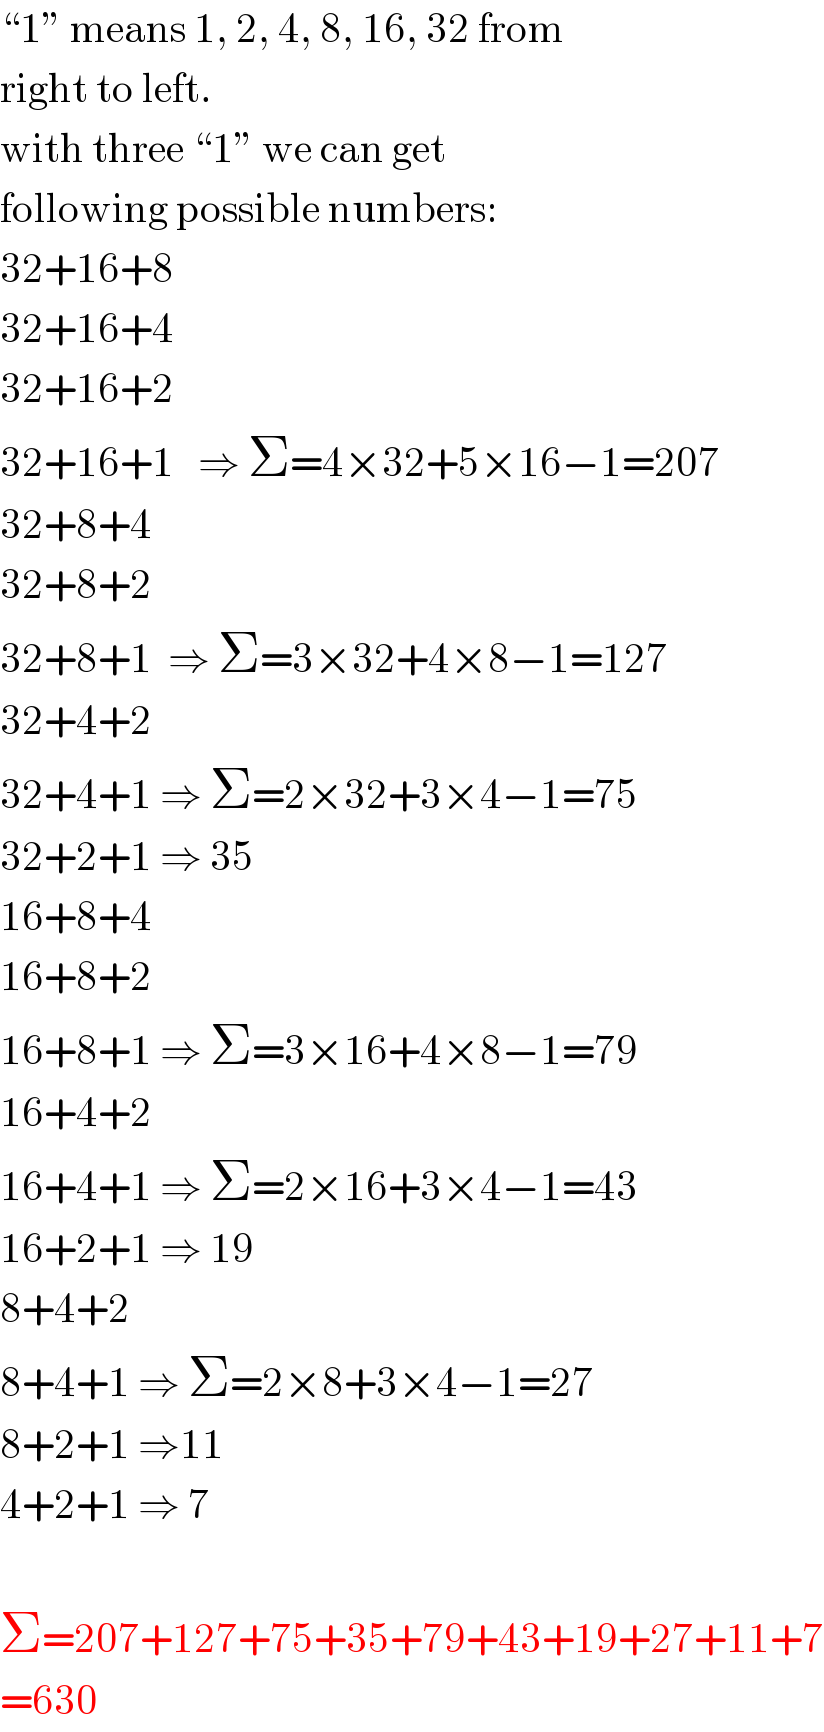 “1” means 1, 2, 4, 8, 16, 32 from  right to left.  with three “1” we can get  following possible numbers:  32+16+8  32+16+4  32+16+2  32+16+1   ⇒ Σ=4×32+5×16−1=207  32+8+4  32+8+2  32+8+1  ⇒ Σ=3×32+4×8−1=127  32+4+2  32+4+1 ⇒ Σ=2×32+3×4−1=75  32+2+1 ⇒ 35  16+8+4  16+8+2  16+8+1 ⇒ Σ=3×16+4×8−1=79  16+4+2  16+4+1 ⇒ Σ=2×16+3×4−1=43  16+2+1 ⇒ 19  8+4+2  8+4+1 ⇒ Σ=2×8+3×4−1=27  8+2+1 ⇒11  4+2+1 ⇒ 7    Σ=207+127+75+35+79+43+19+27+11+7  =630  